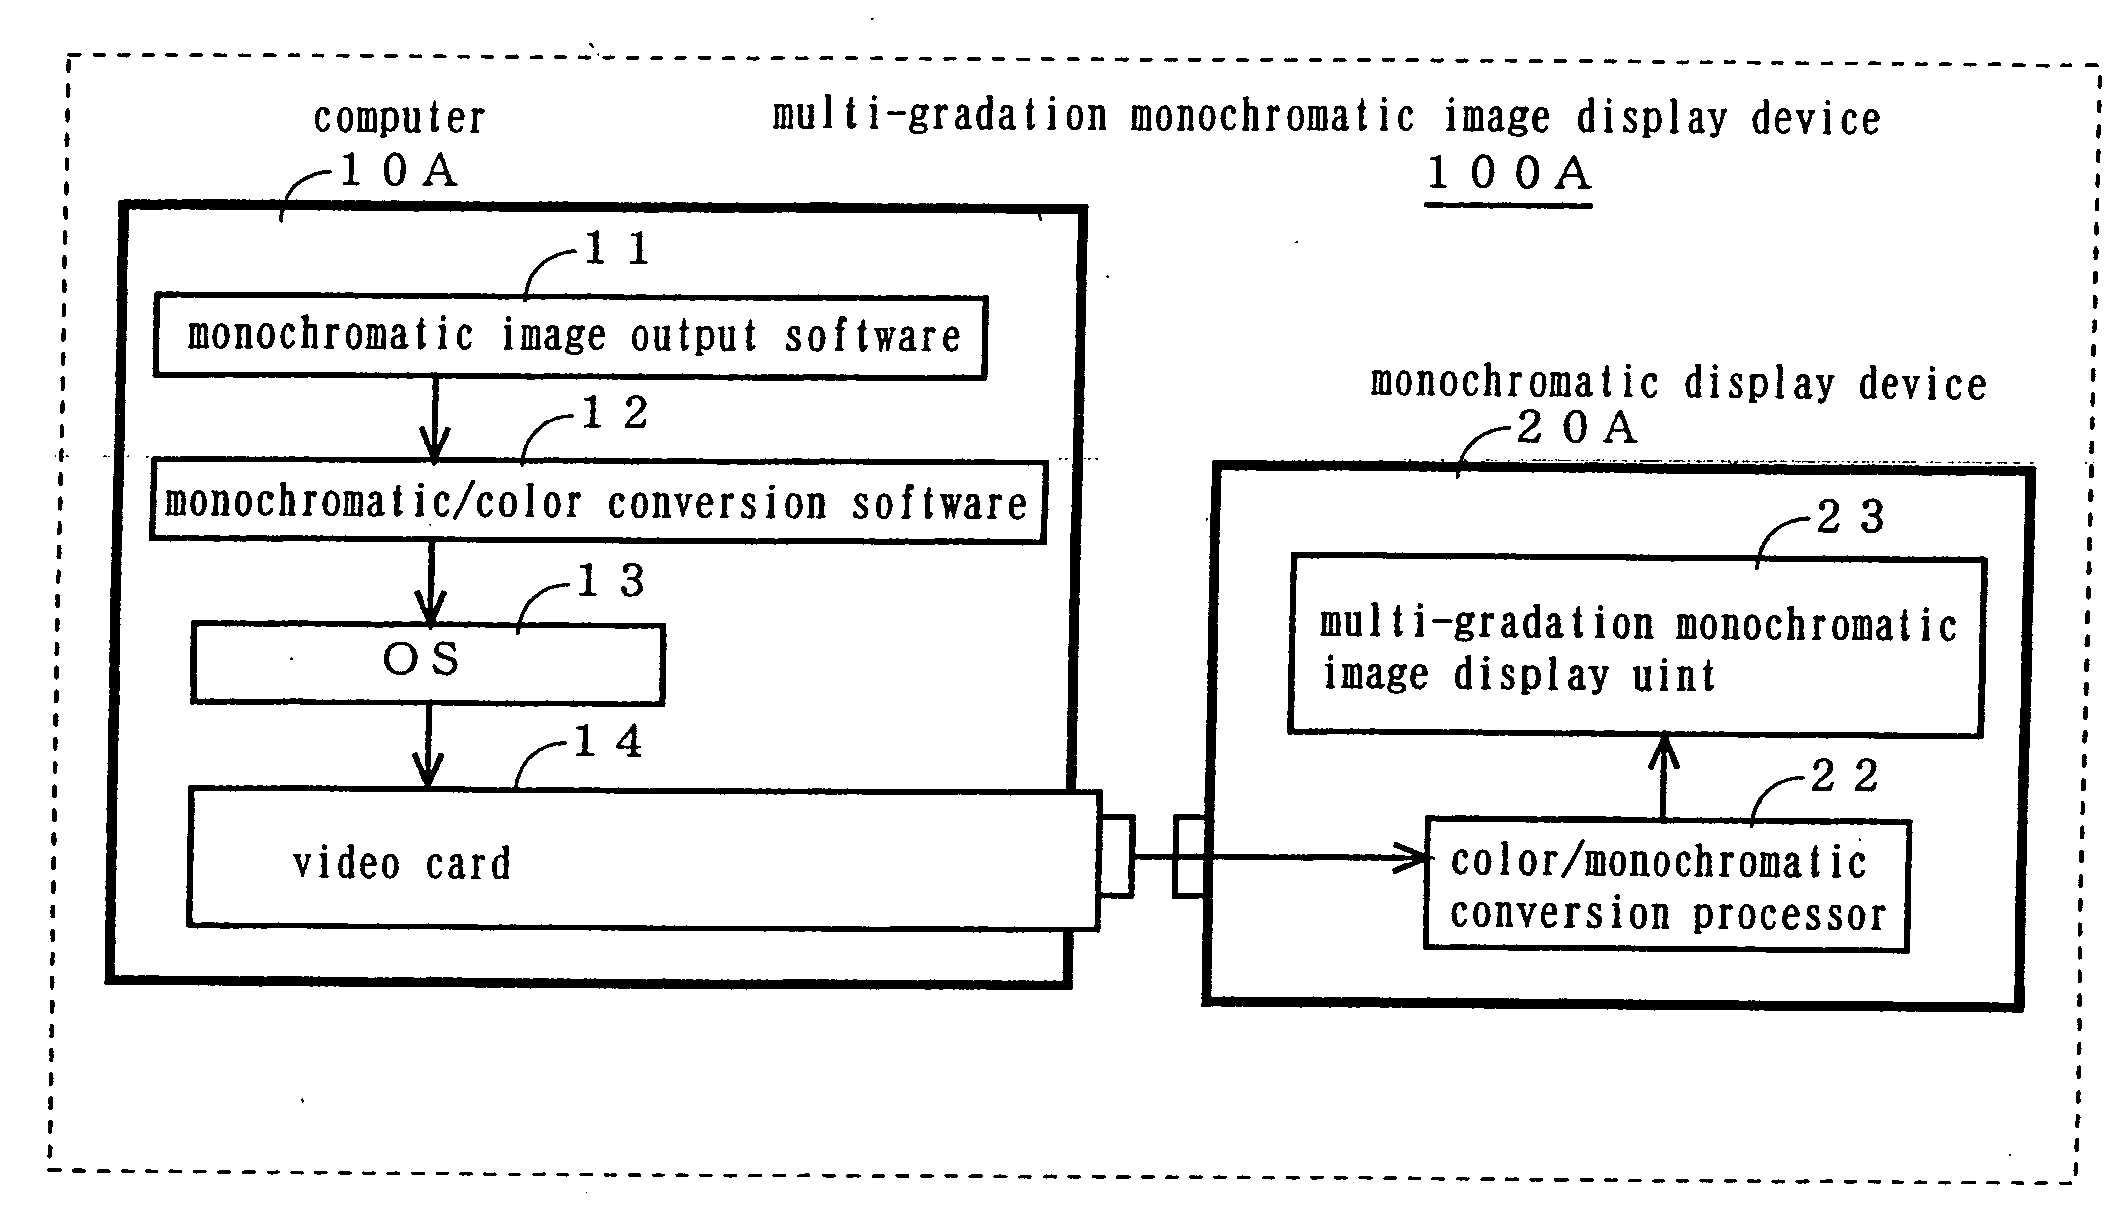 Multi-gradation monochromatic image display method, multi-gradation monochromatic image display device, computer, monochromatic display device, re-conversion adapter, and video card